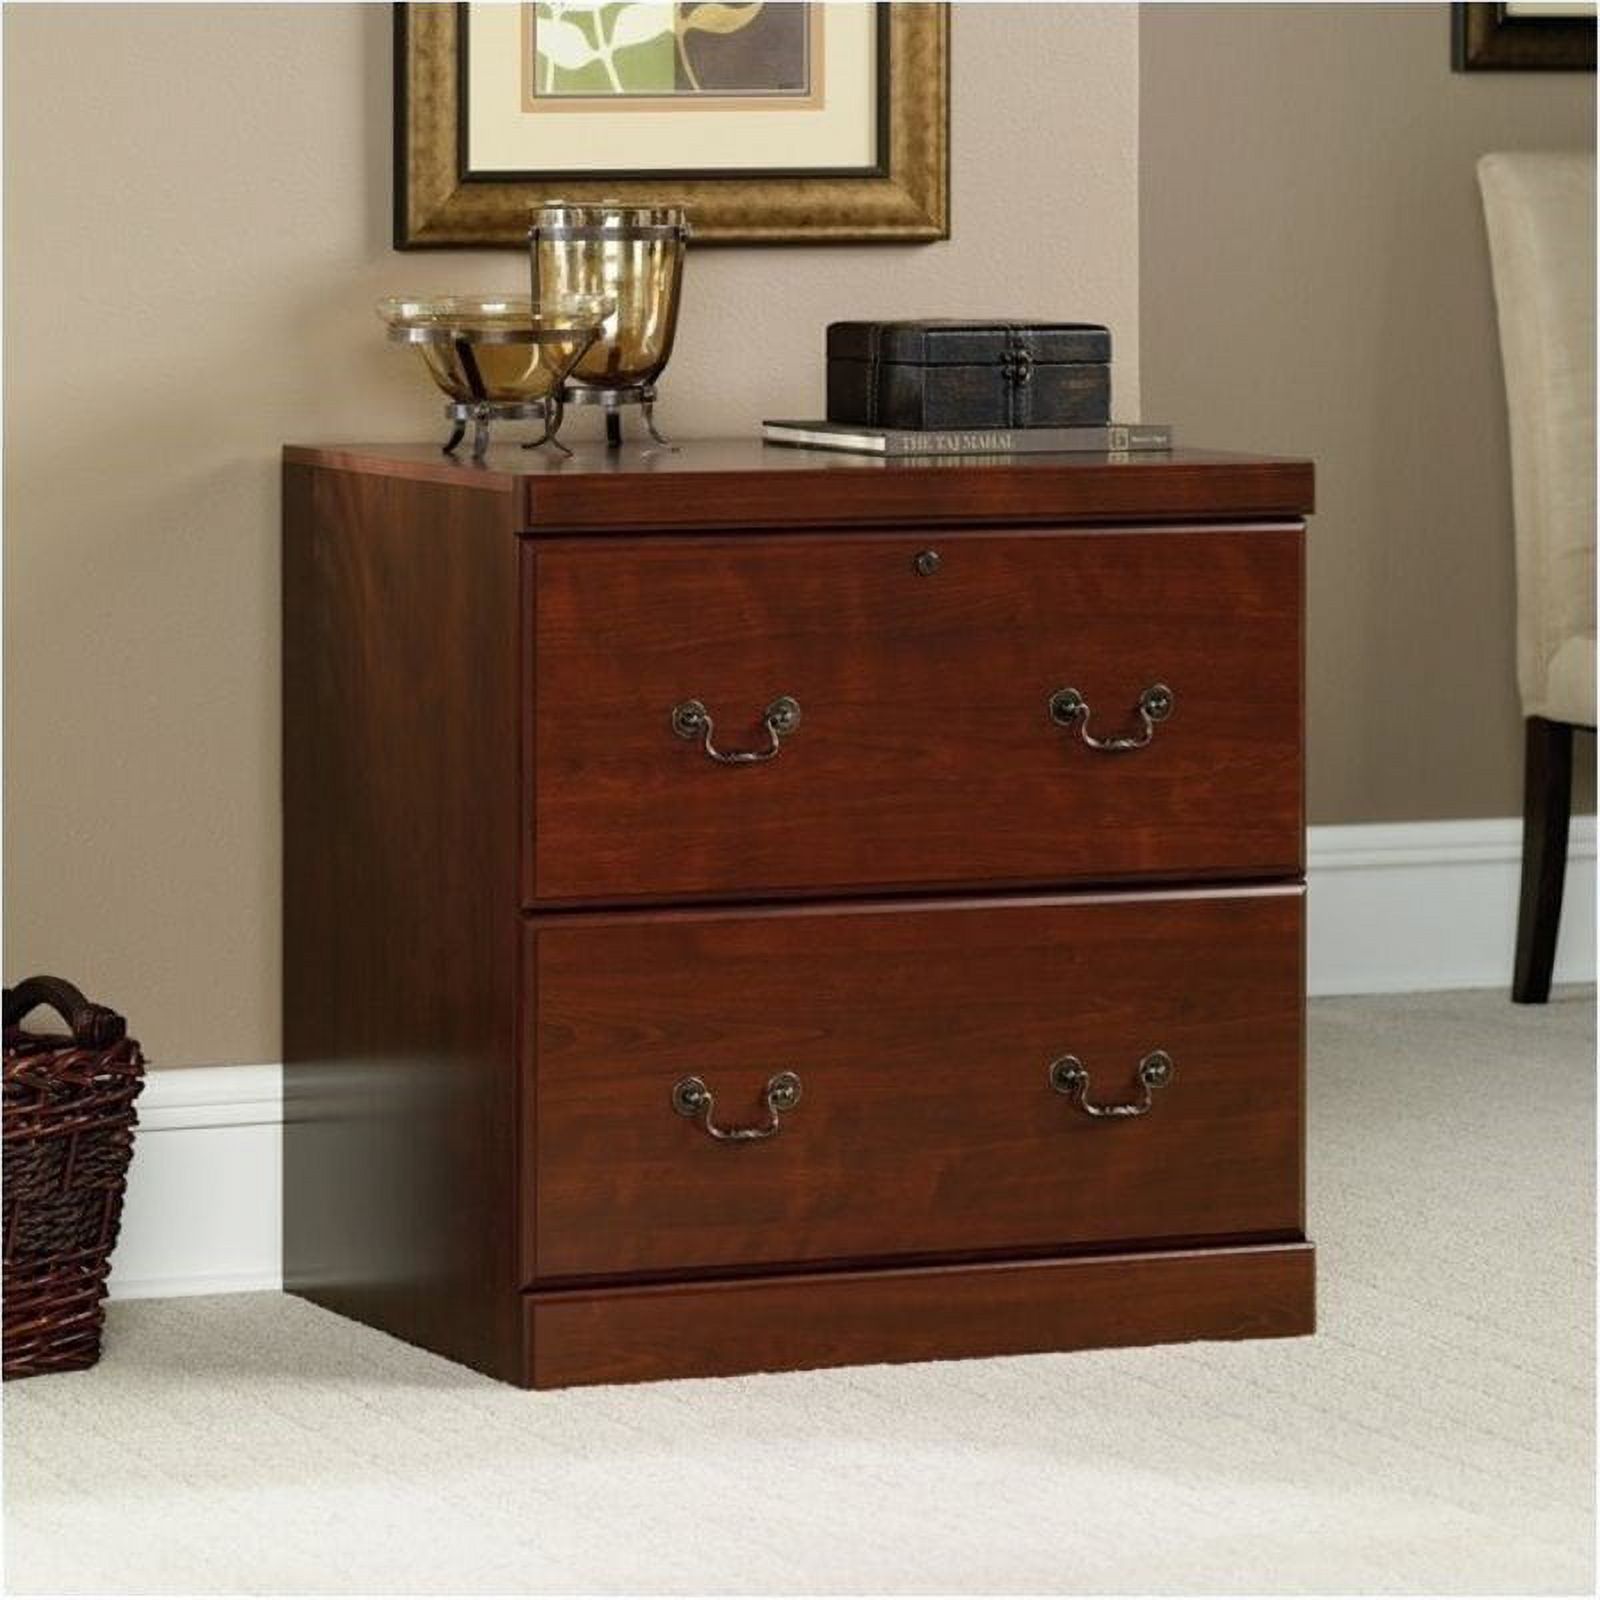 Bowery Hill 2 Drawer Lateral Wood File Cabinet in Classic Cherry - image 2 of 3